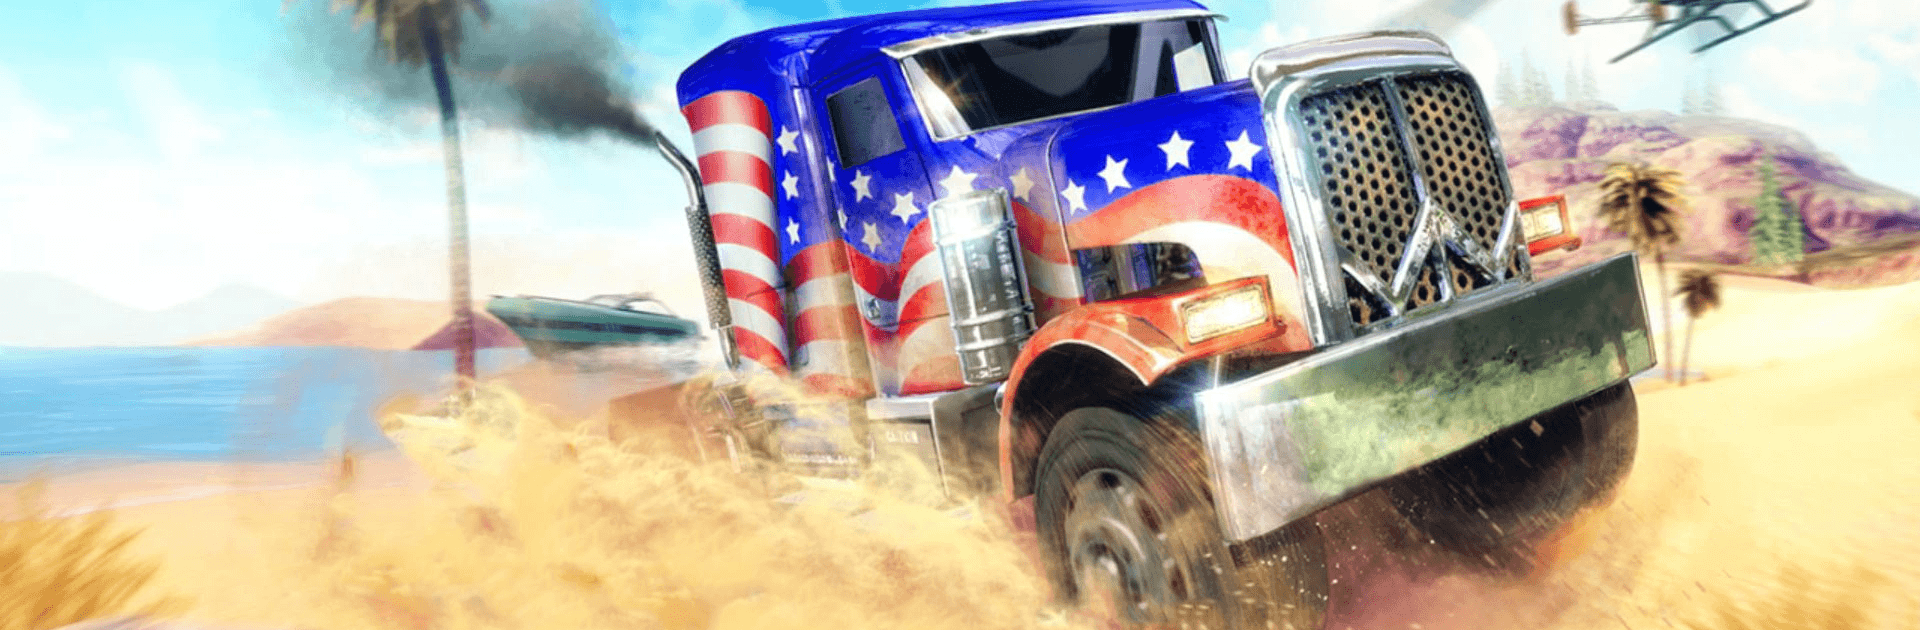 OTR – Offroad Car Driving Game